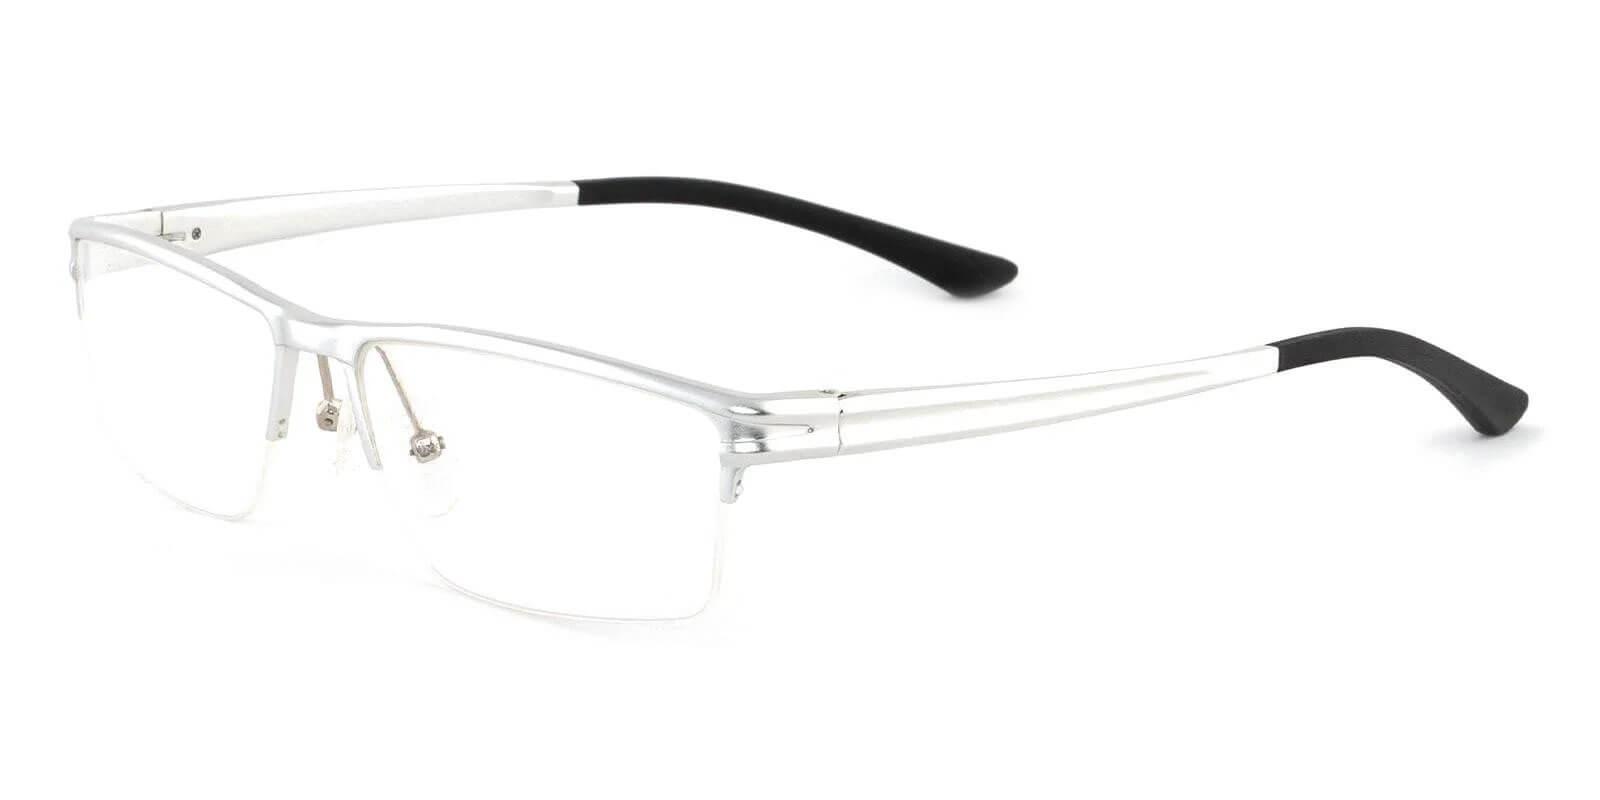 Galileo Silver Metal NosePads , SportsGlasses , SpringHinges Frames from ABBE Glasses